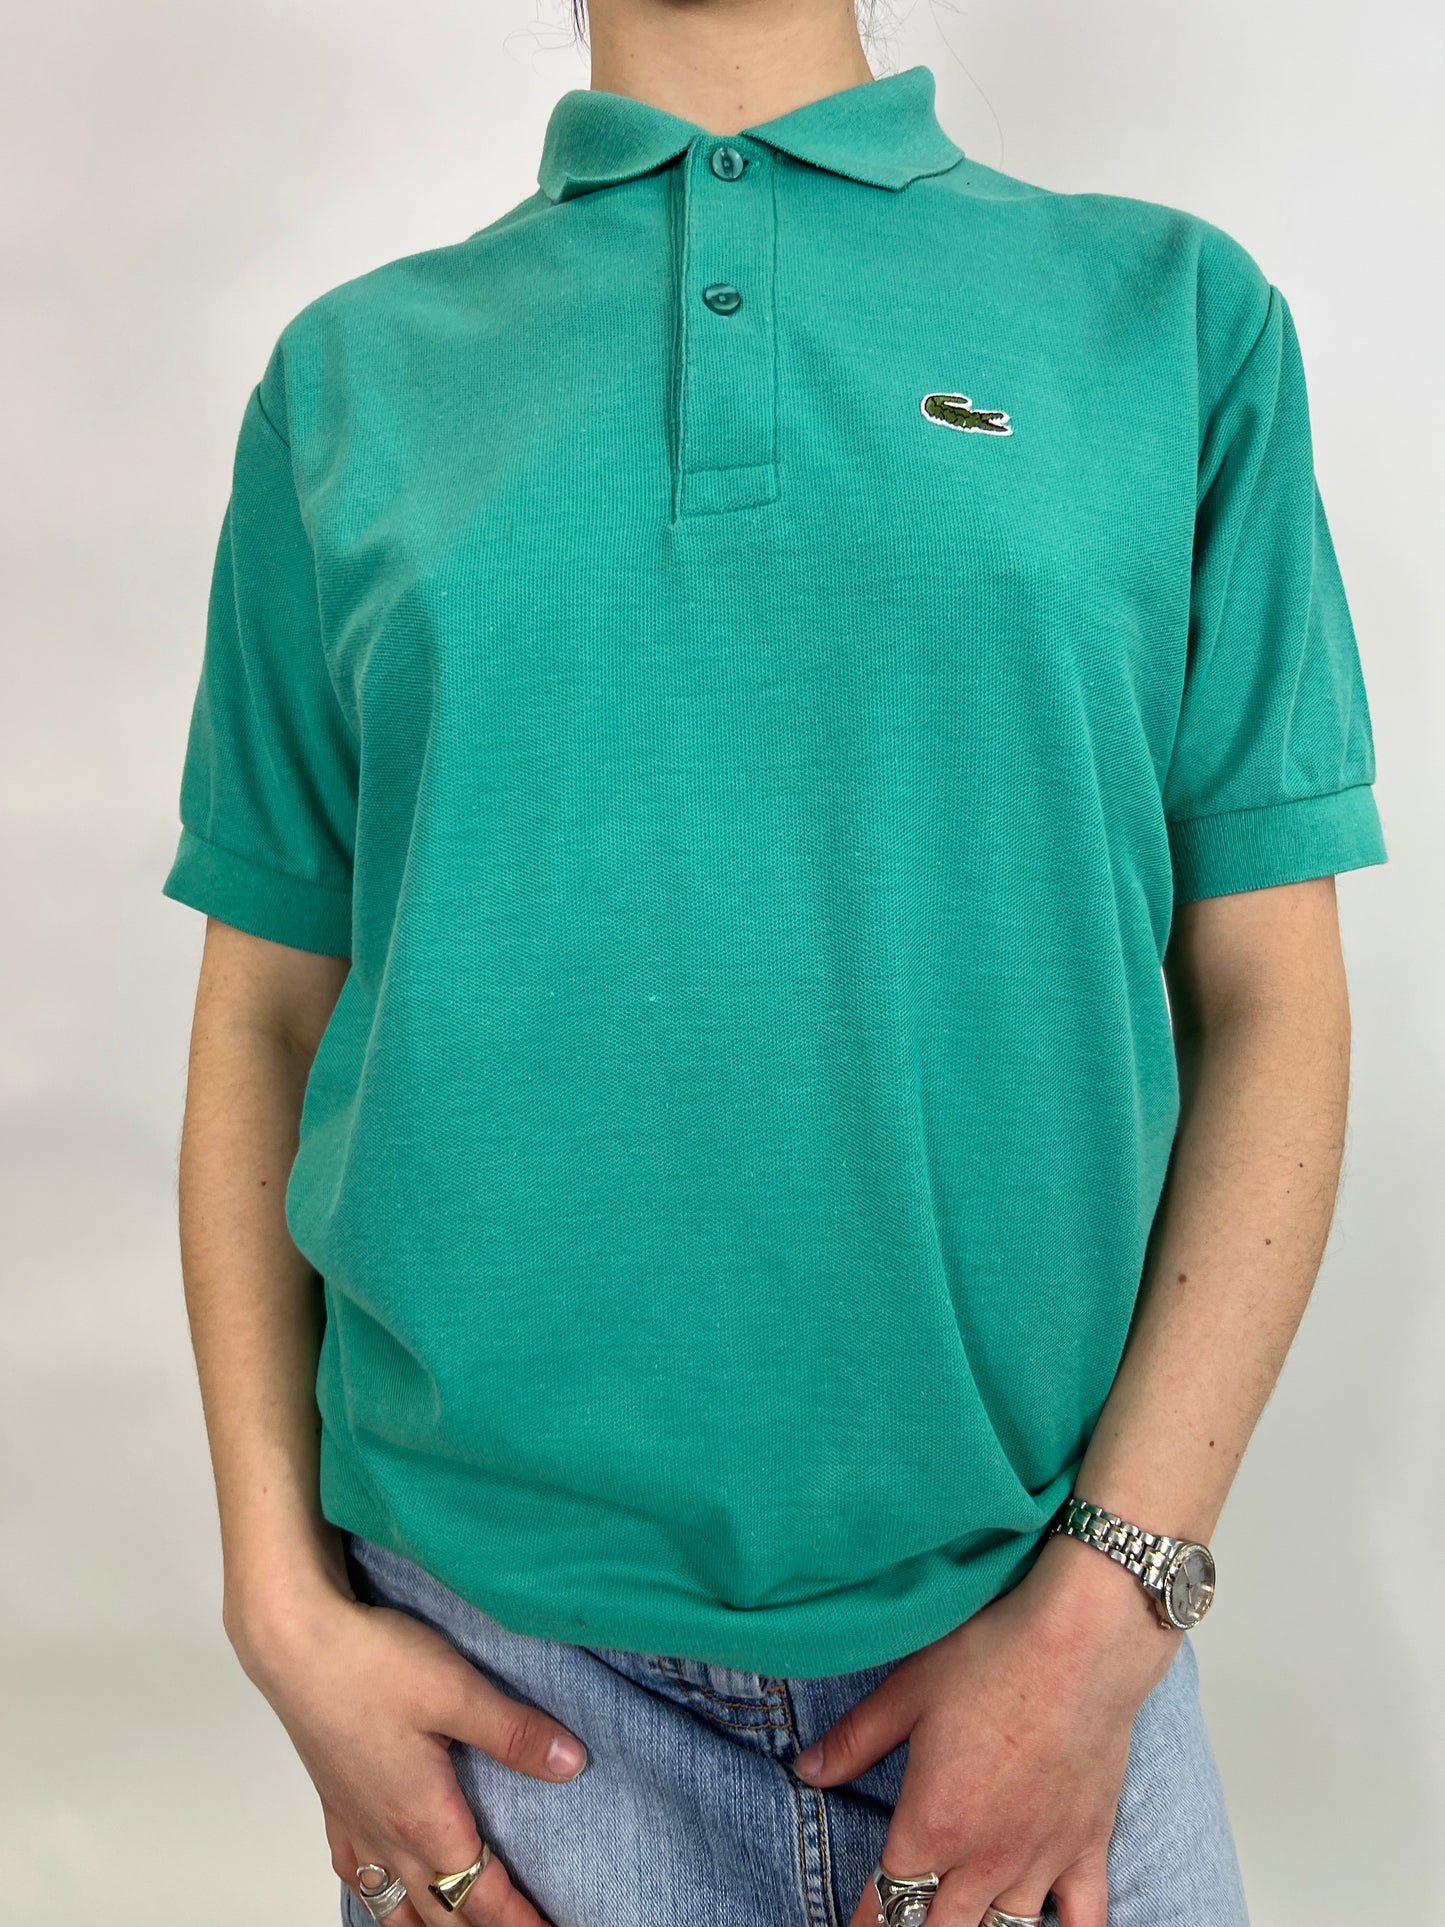 Turquoise Lacoste Polo Shirt